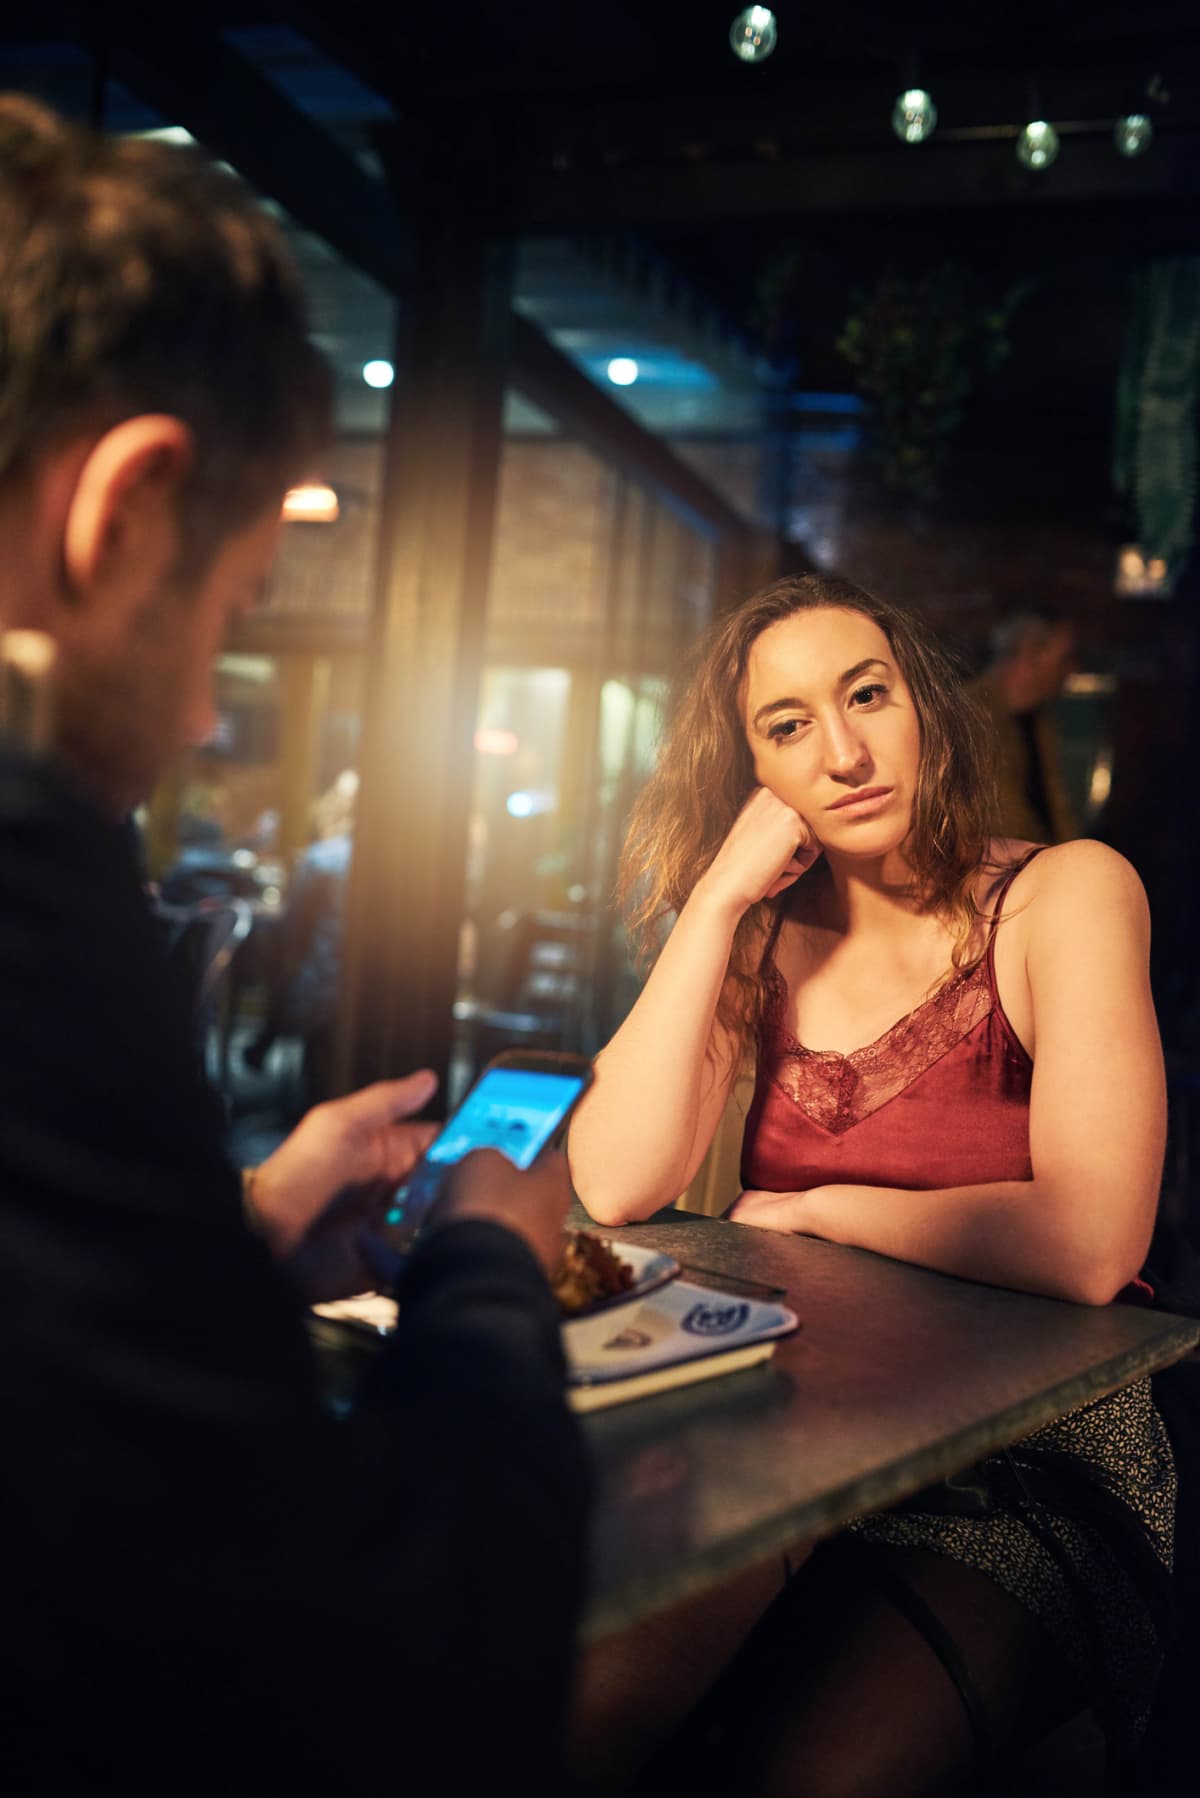 man on phone during date woman looks annoyed